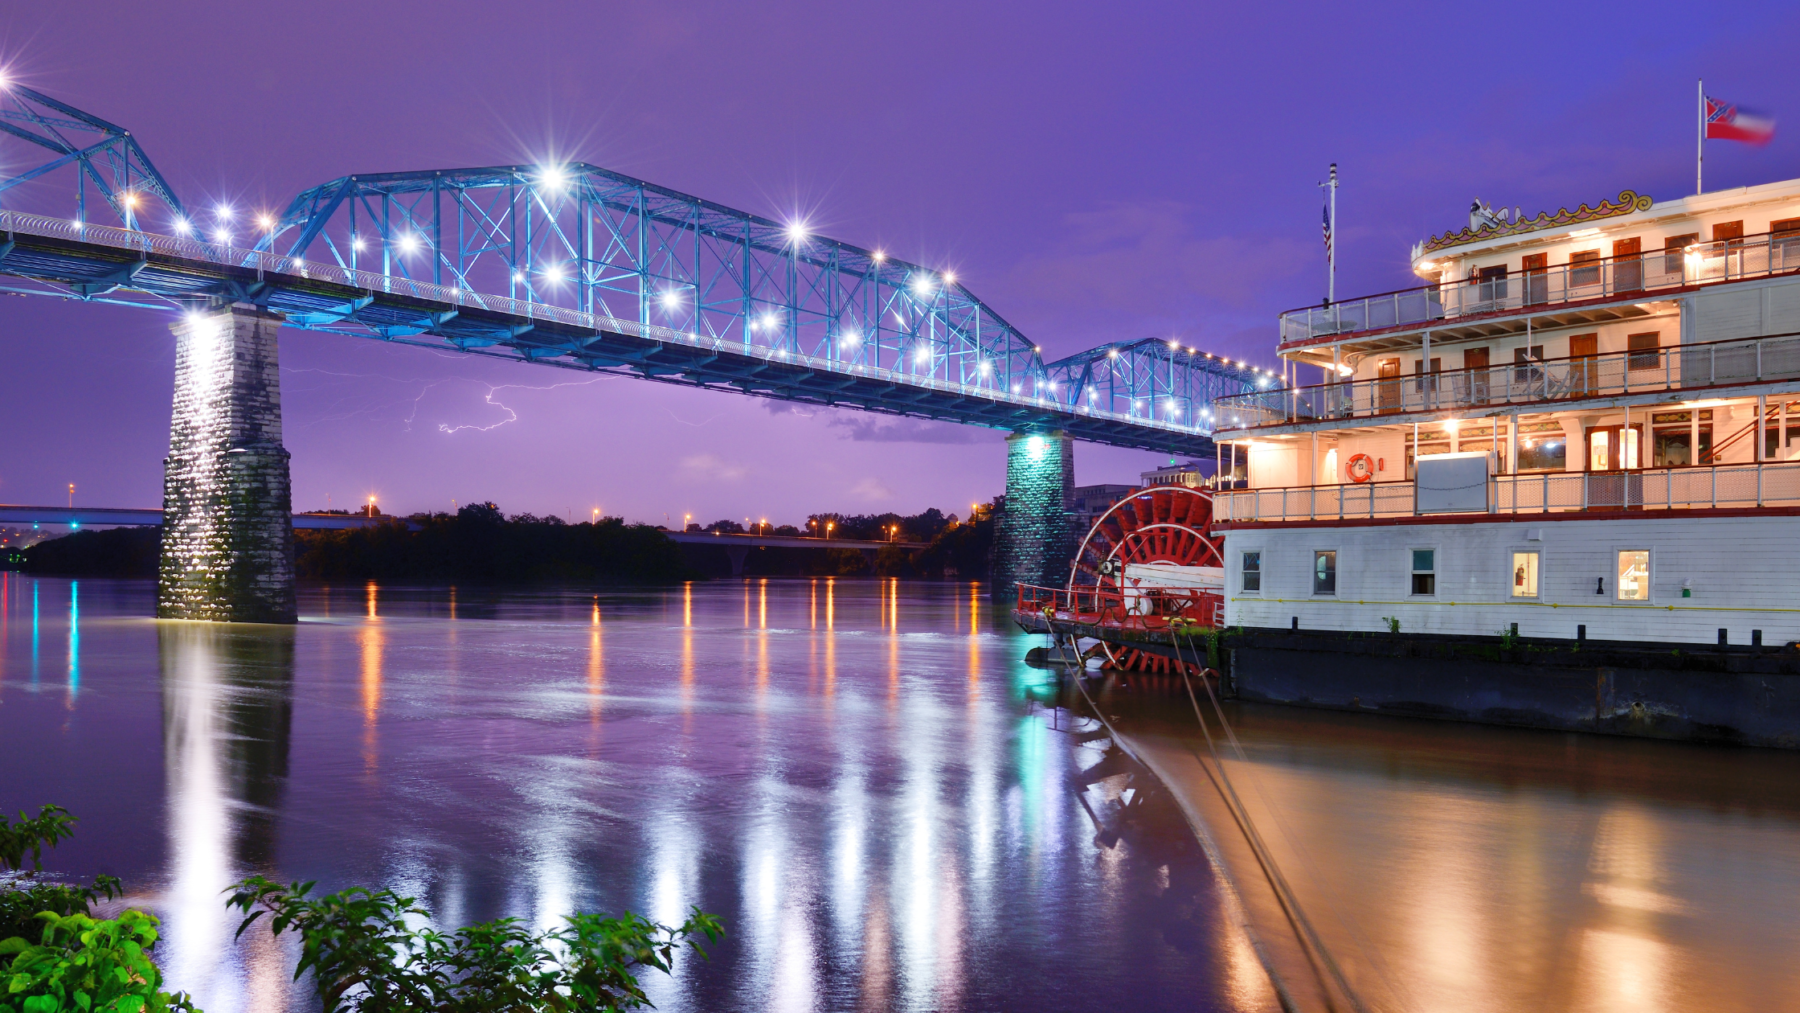 "Tennessee River in Chattanooga, TN at night with a view of a bridge illuminated by twinkling lights in the background. The Southern Belle dinner cruise sailing under the bridge adds to the scenic view."